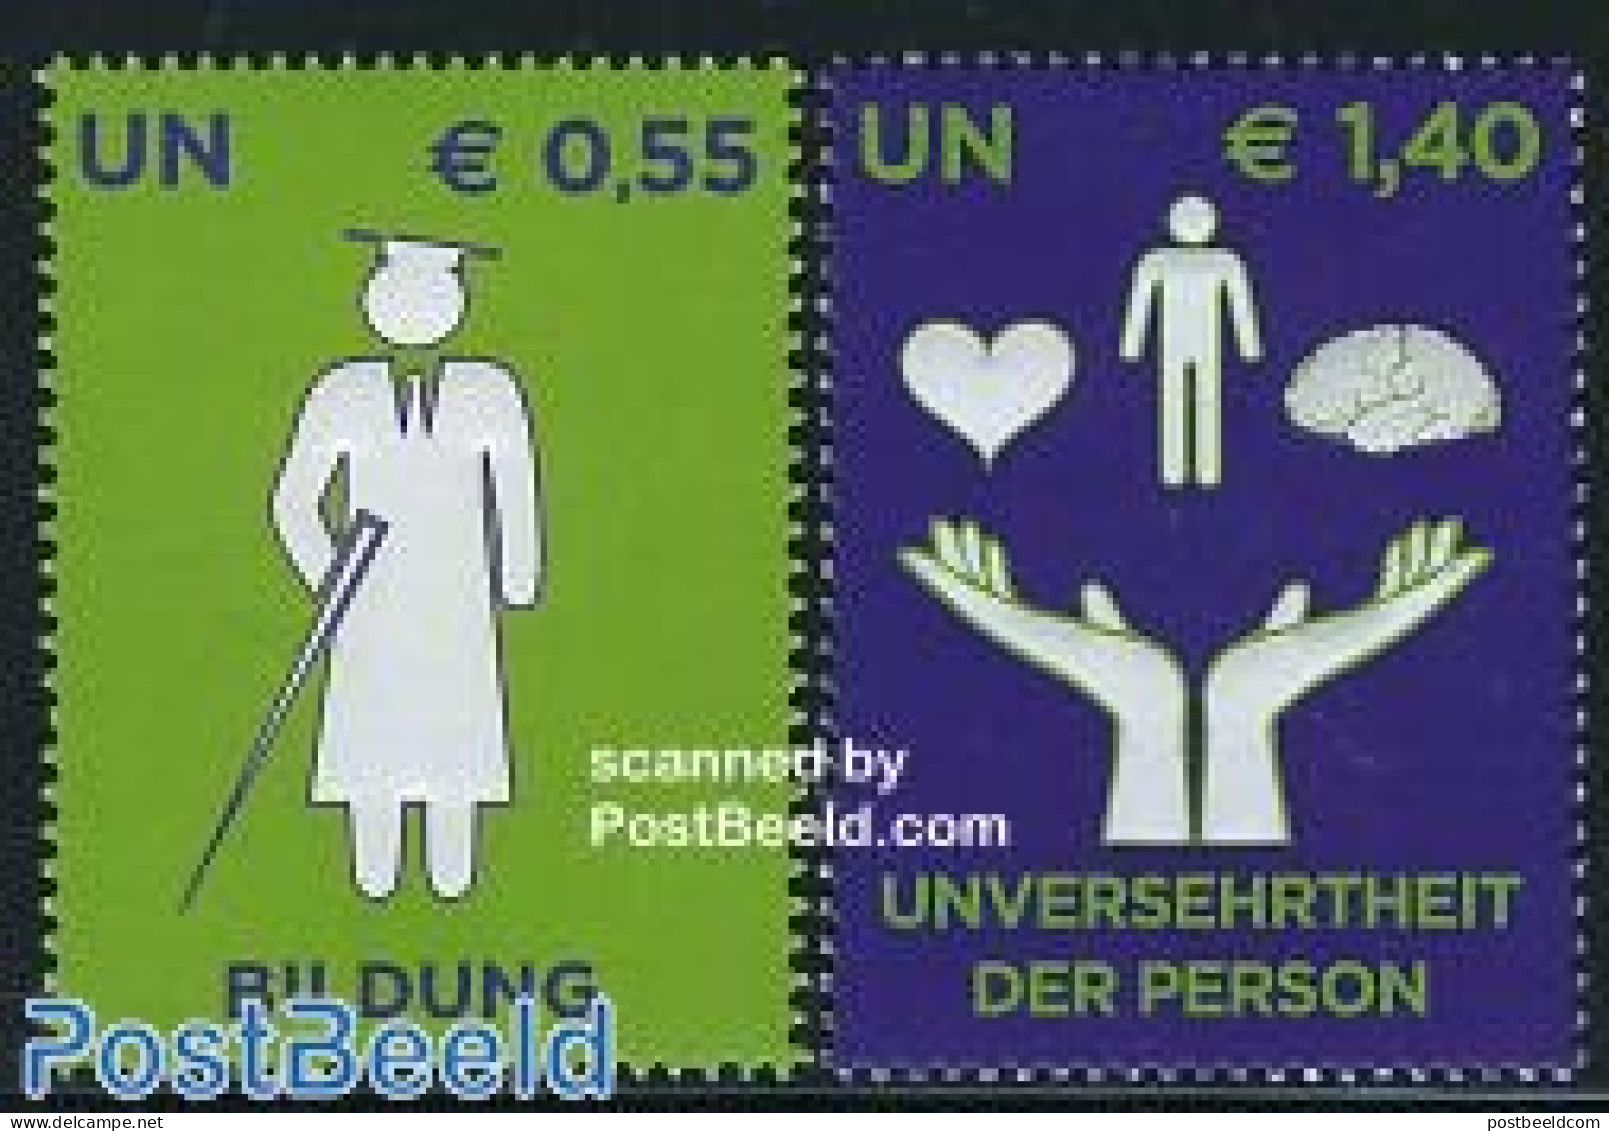 United Nations, Vienna 2008 Rights For Disabled 2v, Mint NH, Health - Disabled Persons - Handicap